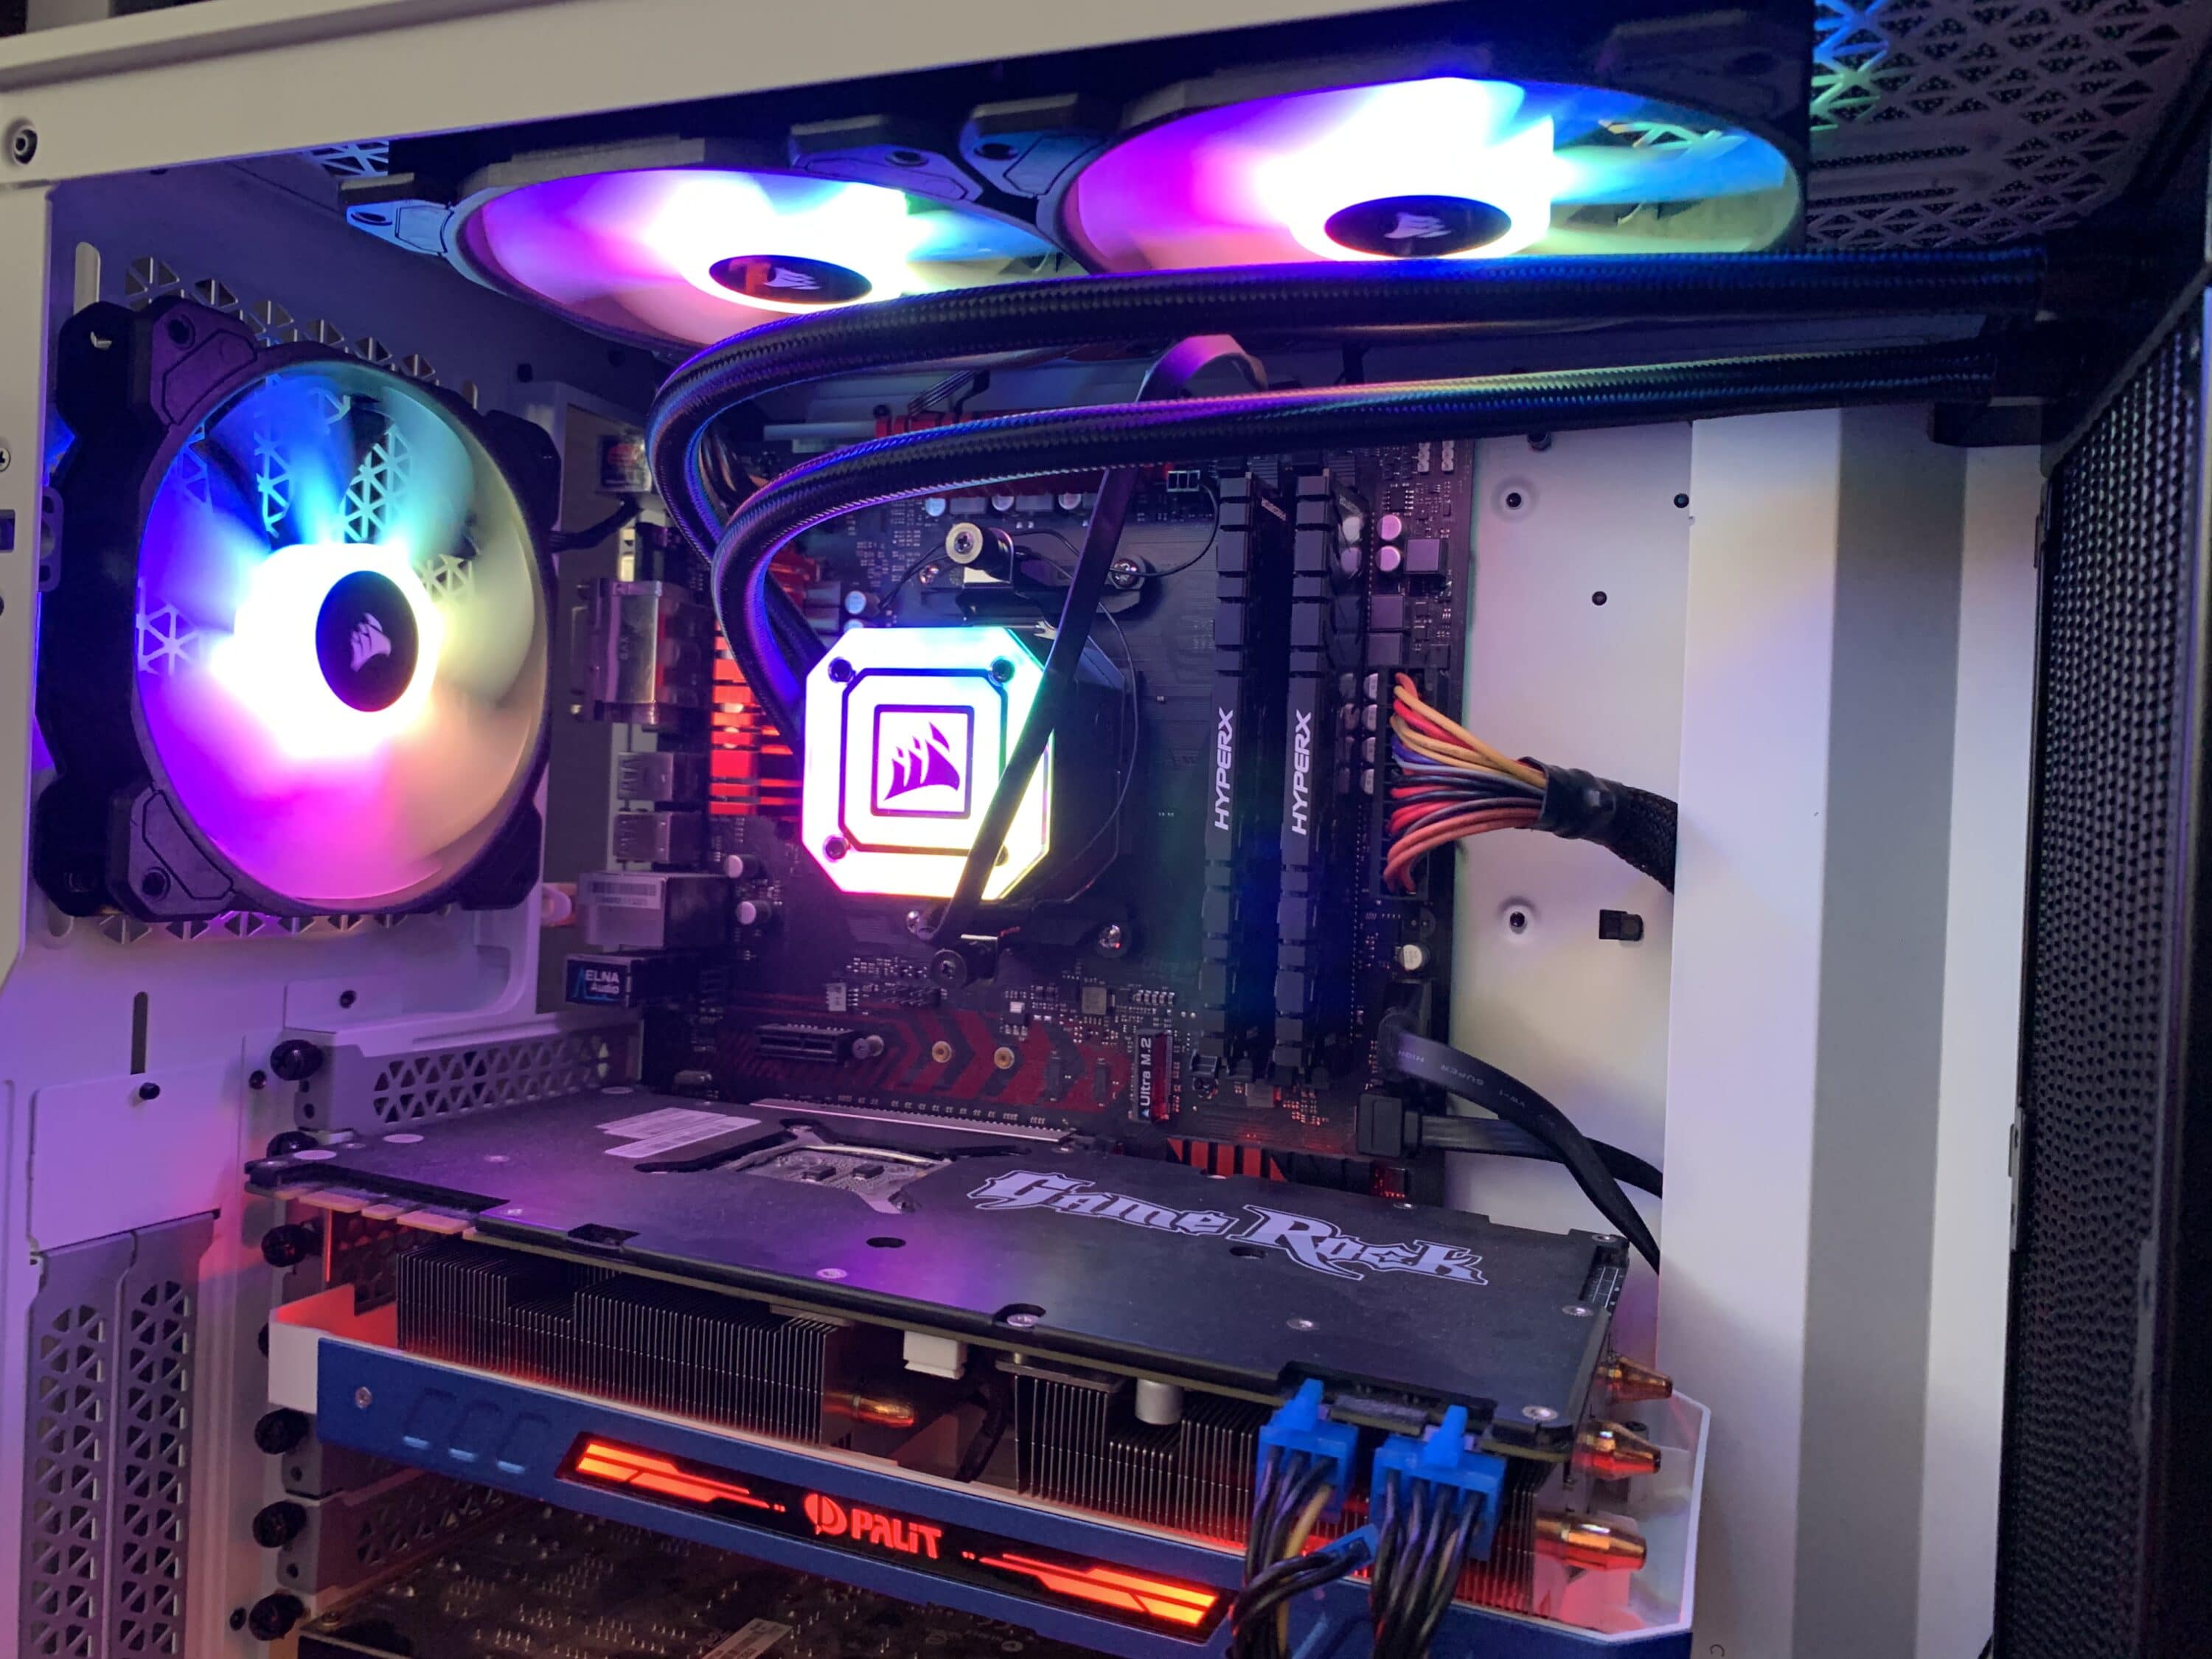 My H115i Elite Capellix and my other two ML140 RGB fans connected